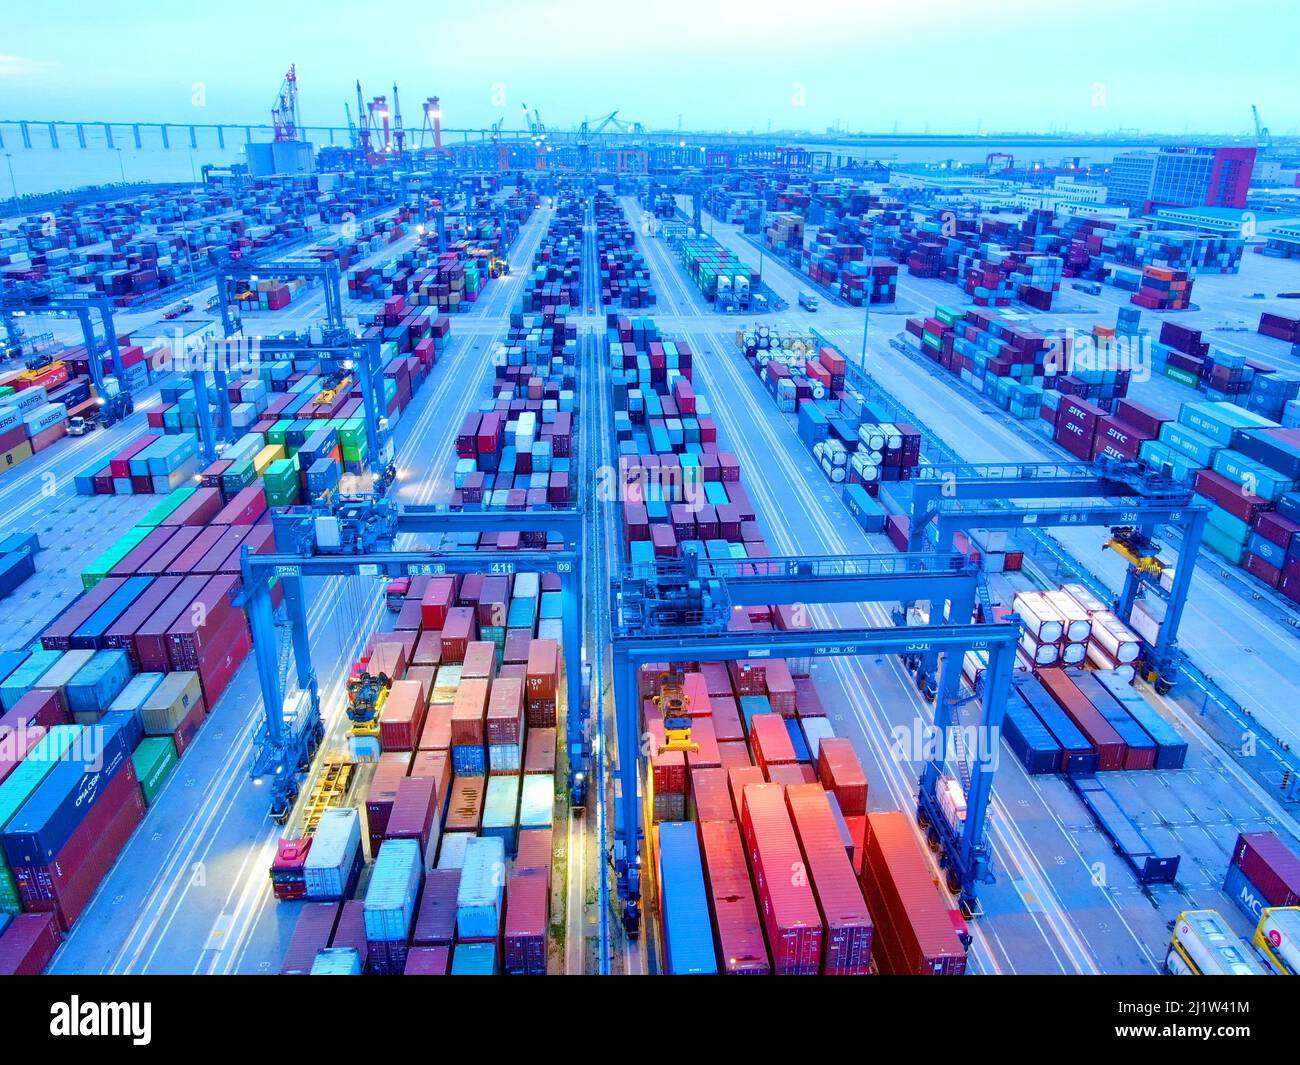 Nantong, Nantong, China. 28th Mar, 2022. On March 26, 2022, Nantong, Jiangsu, the container operation area of Gangtong sea port area. Tonghai Port Area is the first port area on the north bank after seagoing ships enter the 12.5-meter deep-water channel of the Yangtze River. It is also a modern container port area and a river-sea intermodal transport hub port built by Nantong City. According to Nantong Customs statistics, from January to February 2022, Nantong's foreign trade import and export value totaled 55.68 billion yuan, an increase of 23.5% over the same period last year, and foreign Stock Photo